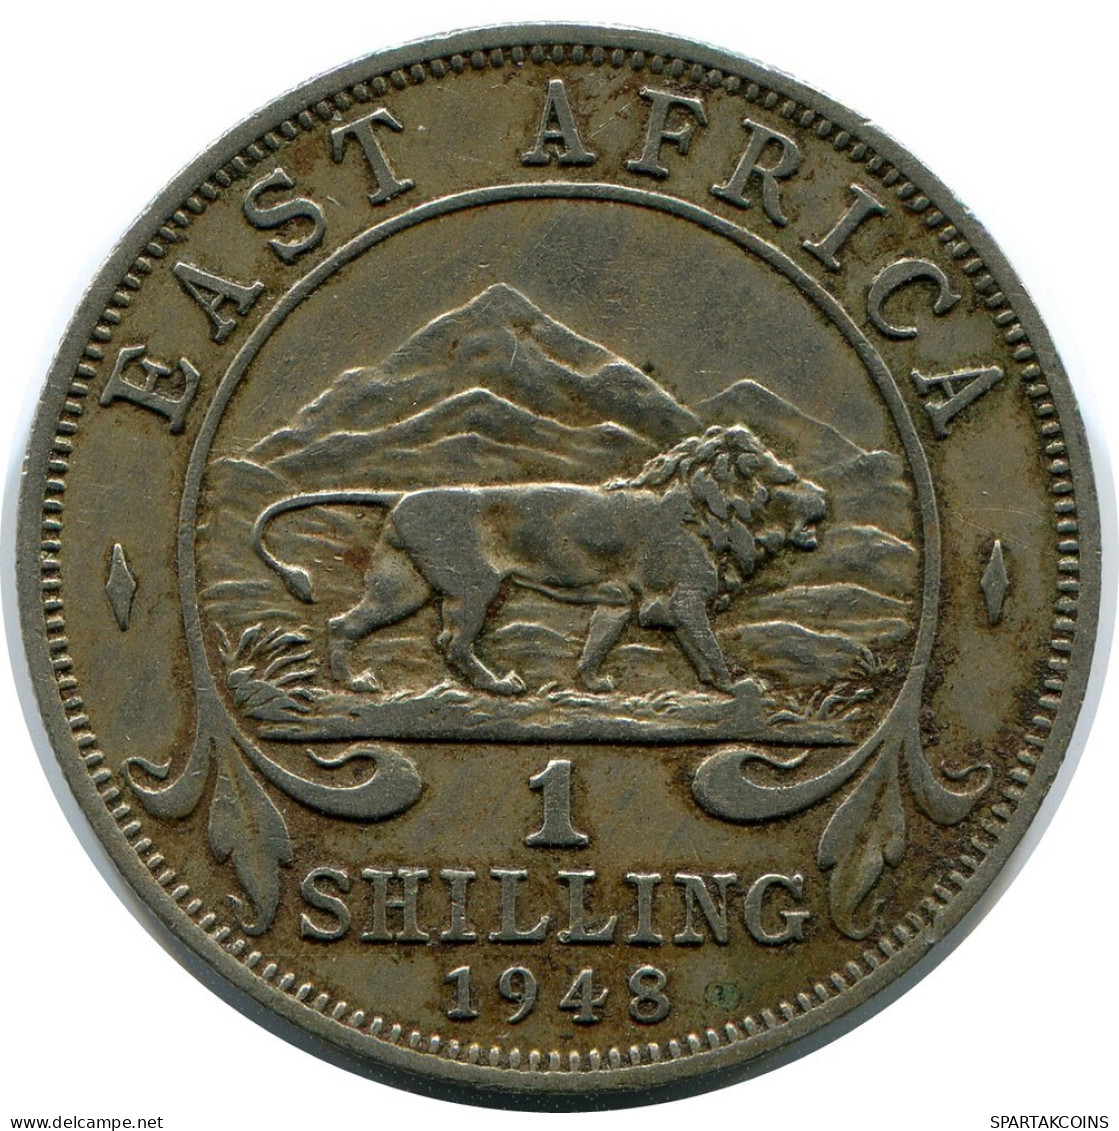 1 SHILLING 1948 EAST AFRICA Coin #AP875.U.A - British Colony